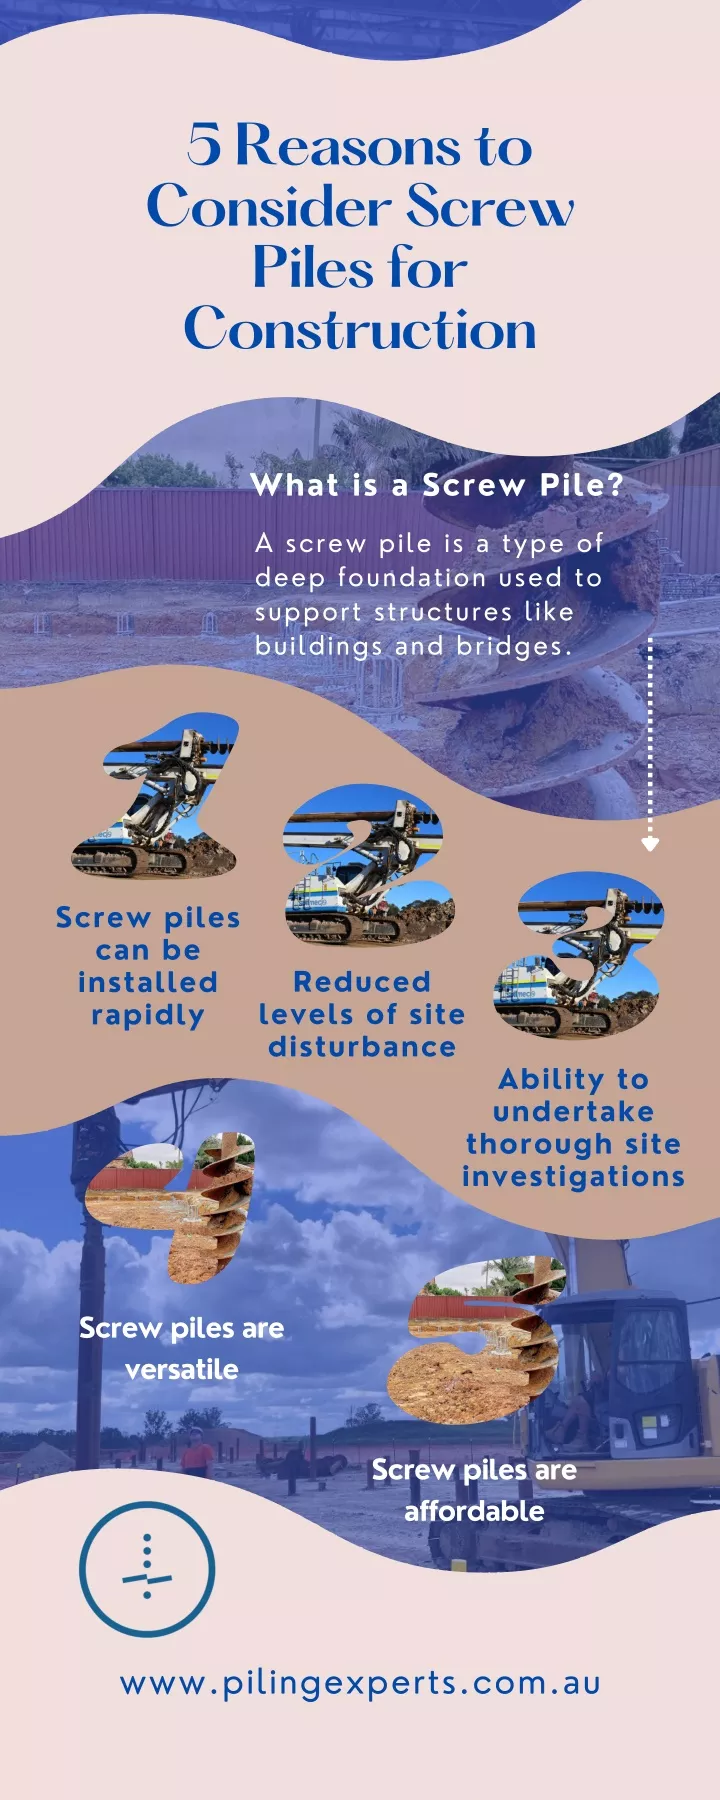 5 reasons to consider screw piles for construction